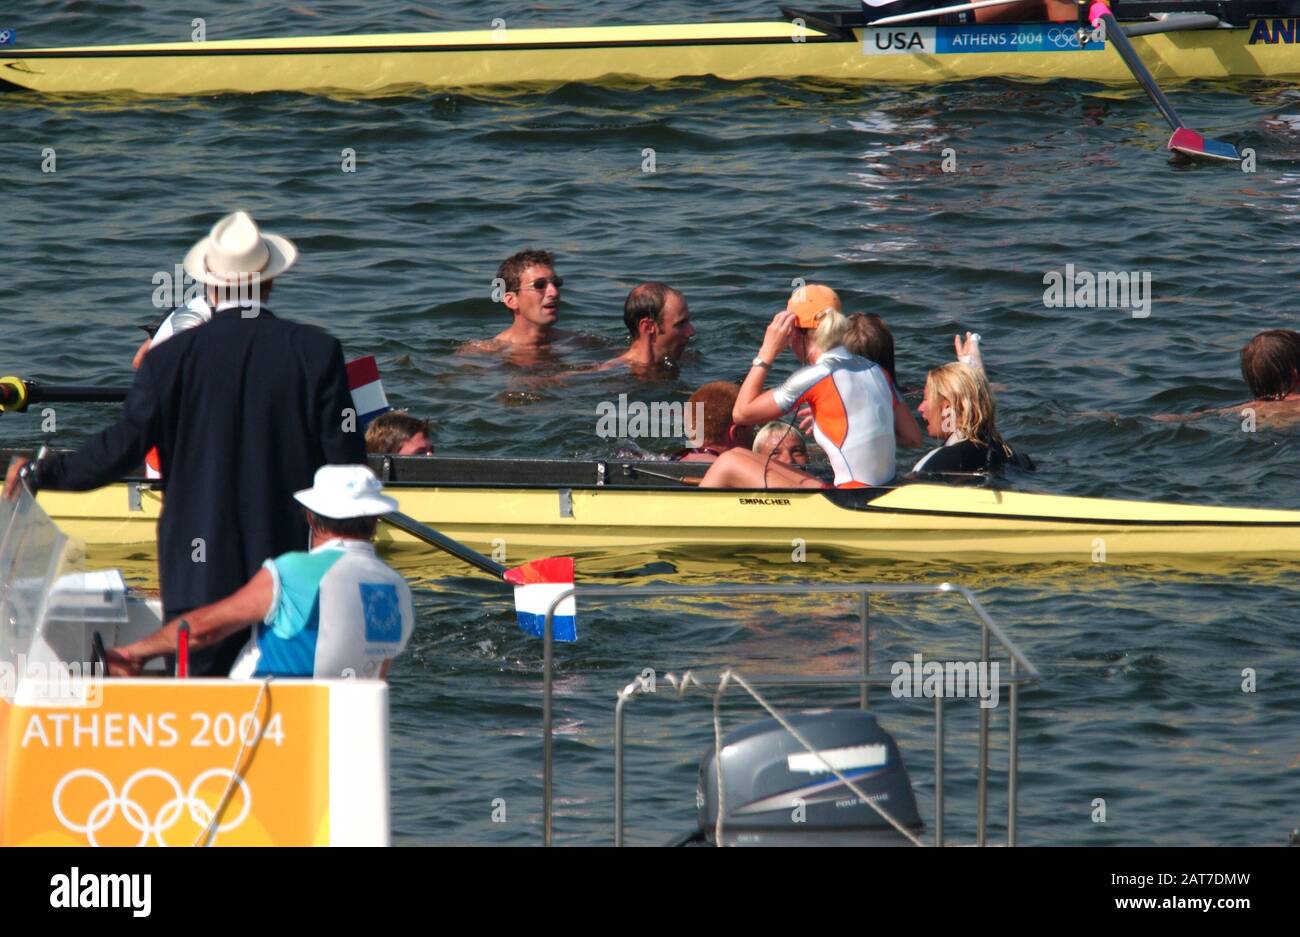 20040822 Olympic Games Athens Greece  [Rowing-Sun Finals day]  Lake Schinias.  Women's Olympic eights final from finish tower.   NED W8+ after winning the bronze medal are surrounded by  Dutch fans swimming out to congratulate the crew.  NED W8+ Marlies Smulders, 2. Nienke Hommes, 3. Froukji Wegman, 4. Hurnet Dekkers, 5. Sarah Siegelaar, 6. Annemiek de Haan, 7. Annemarieke van Rumpt, stroke Helen Tanger and cox Esther Worhel.    Photo  Peter Spurrier.   email images@intersport-images.com Stock Photo